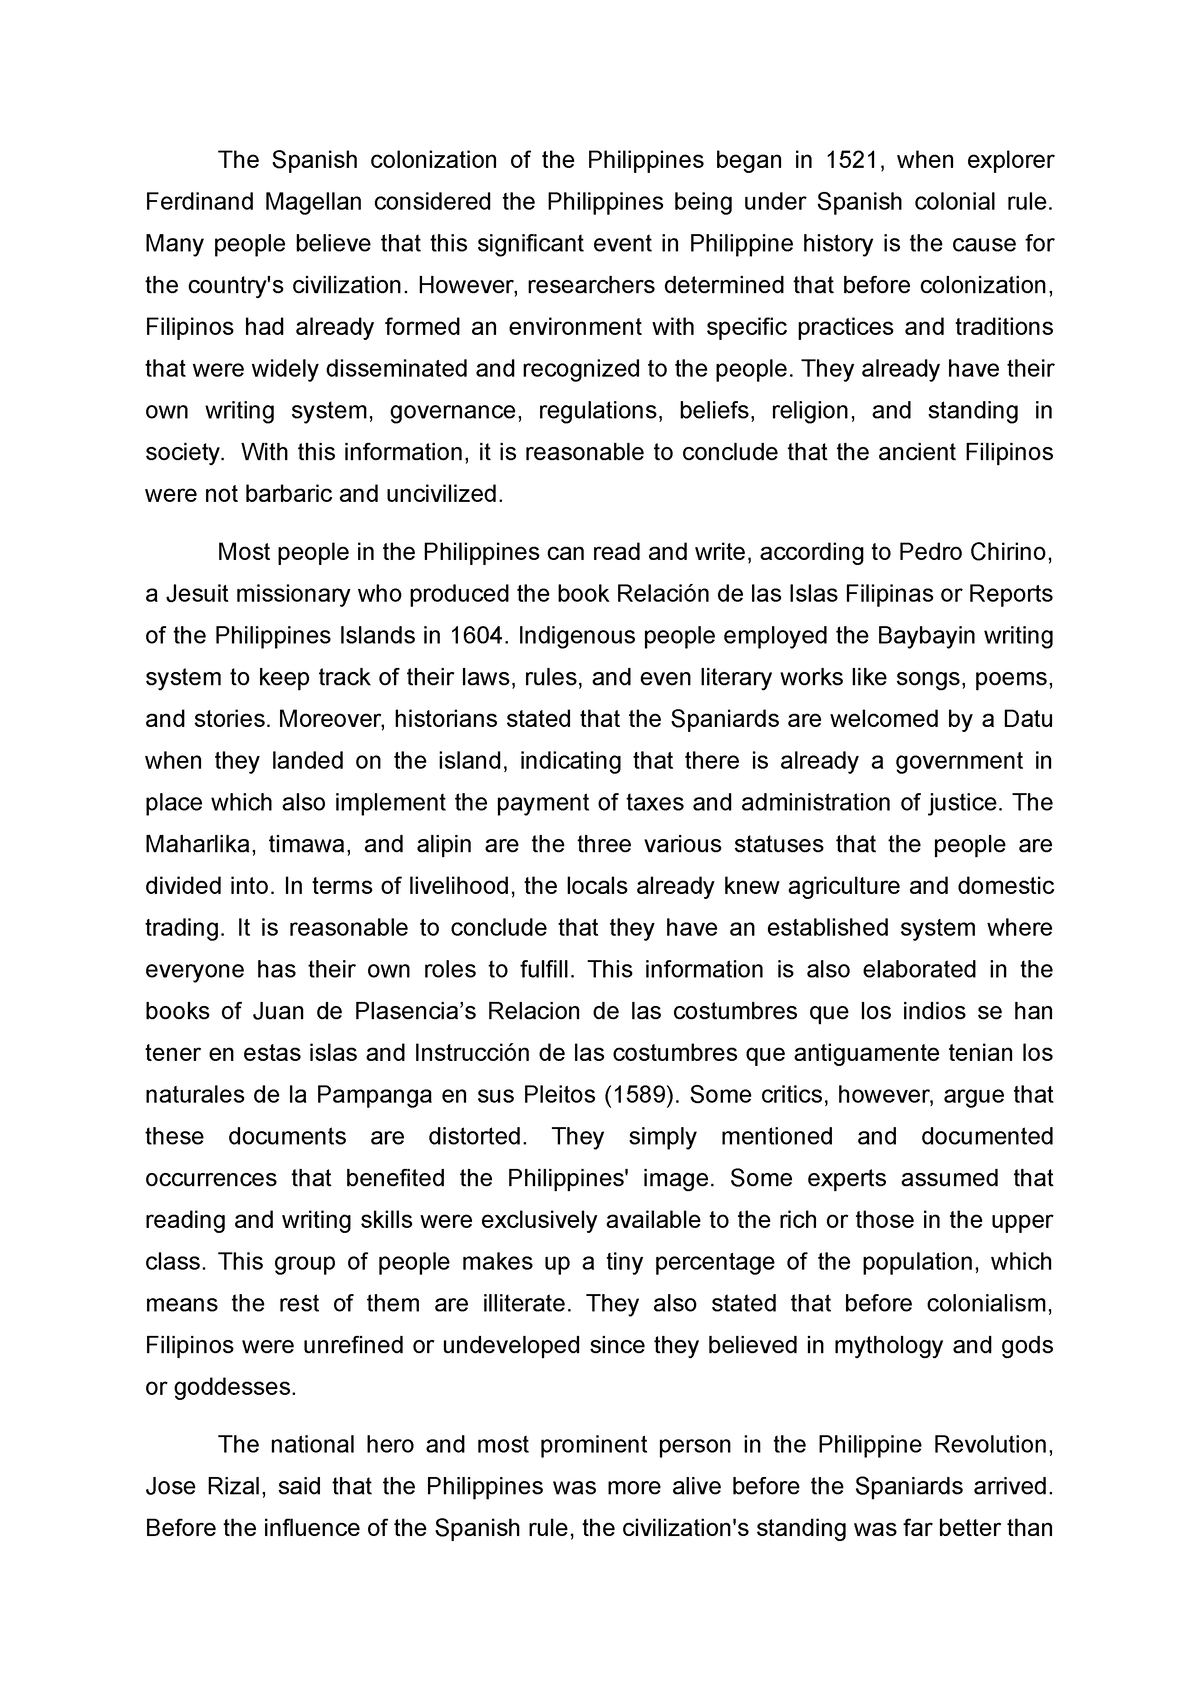 civil rights in the philippines essay